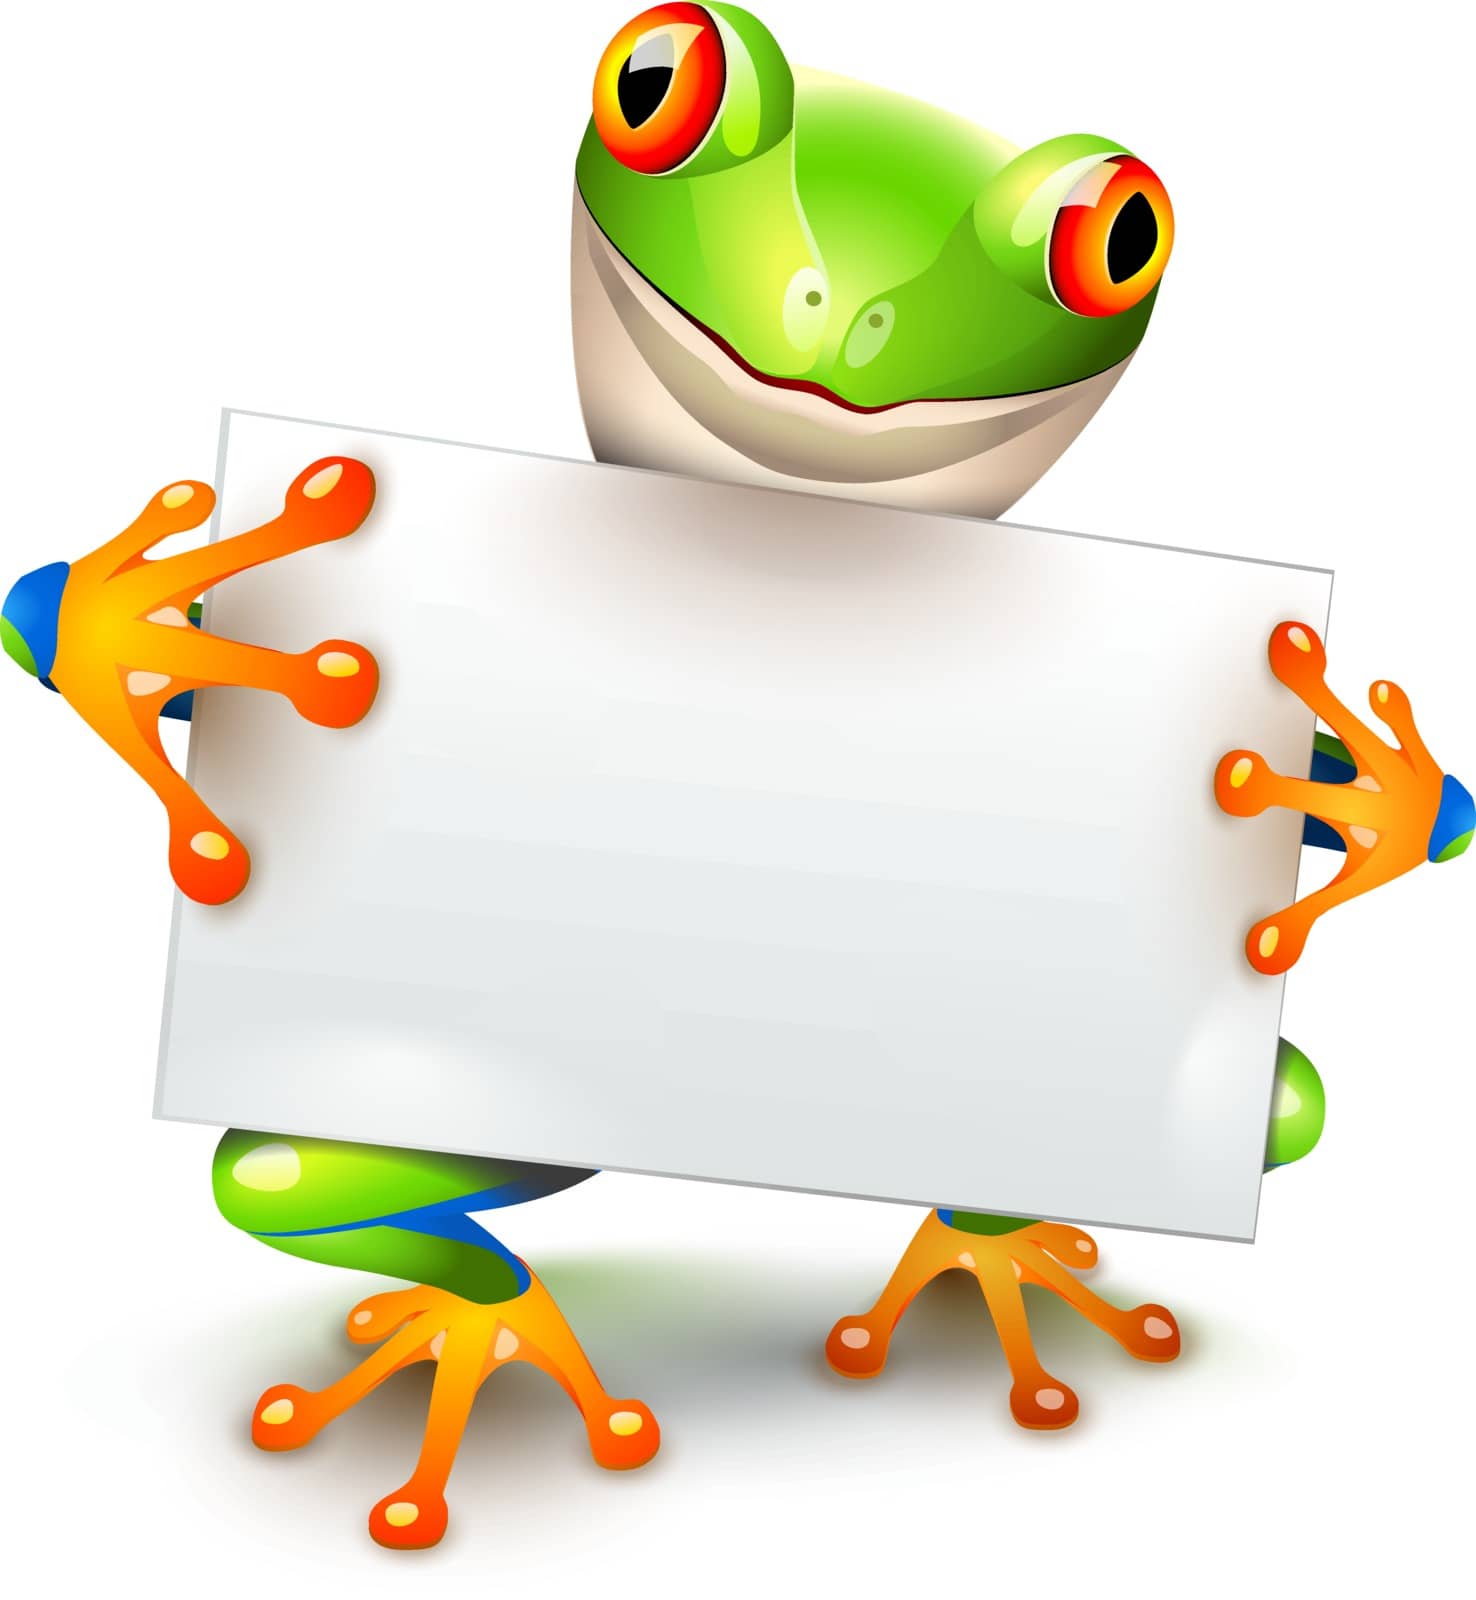 Little tree frog message by Tilo